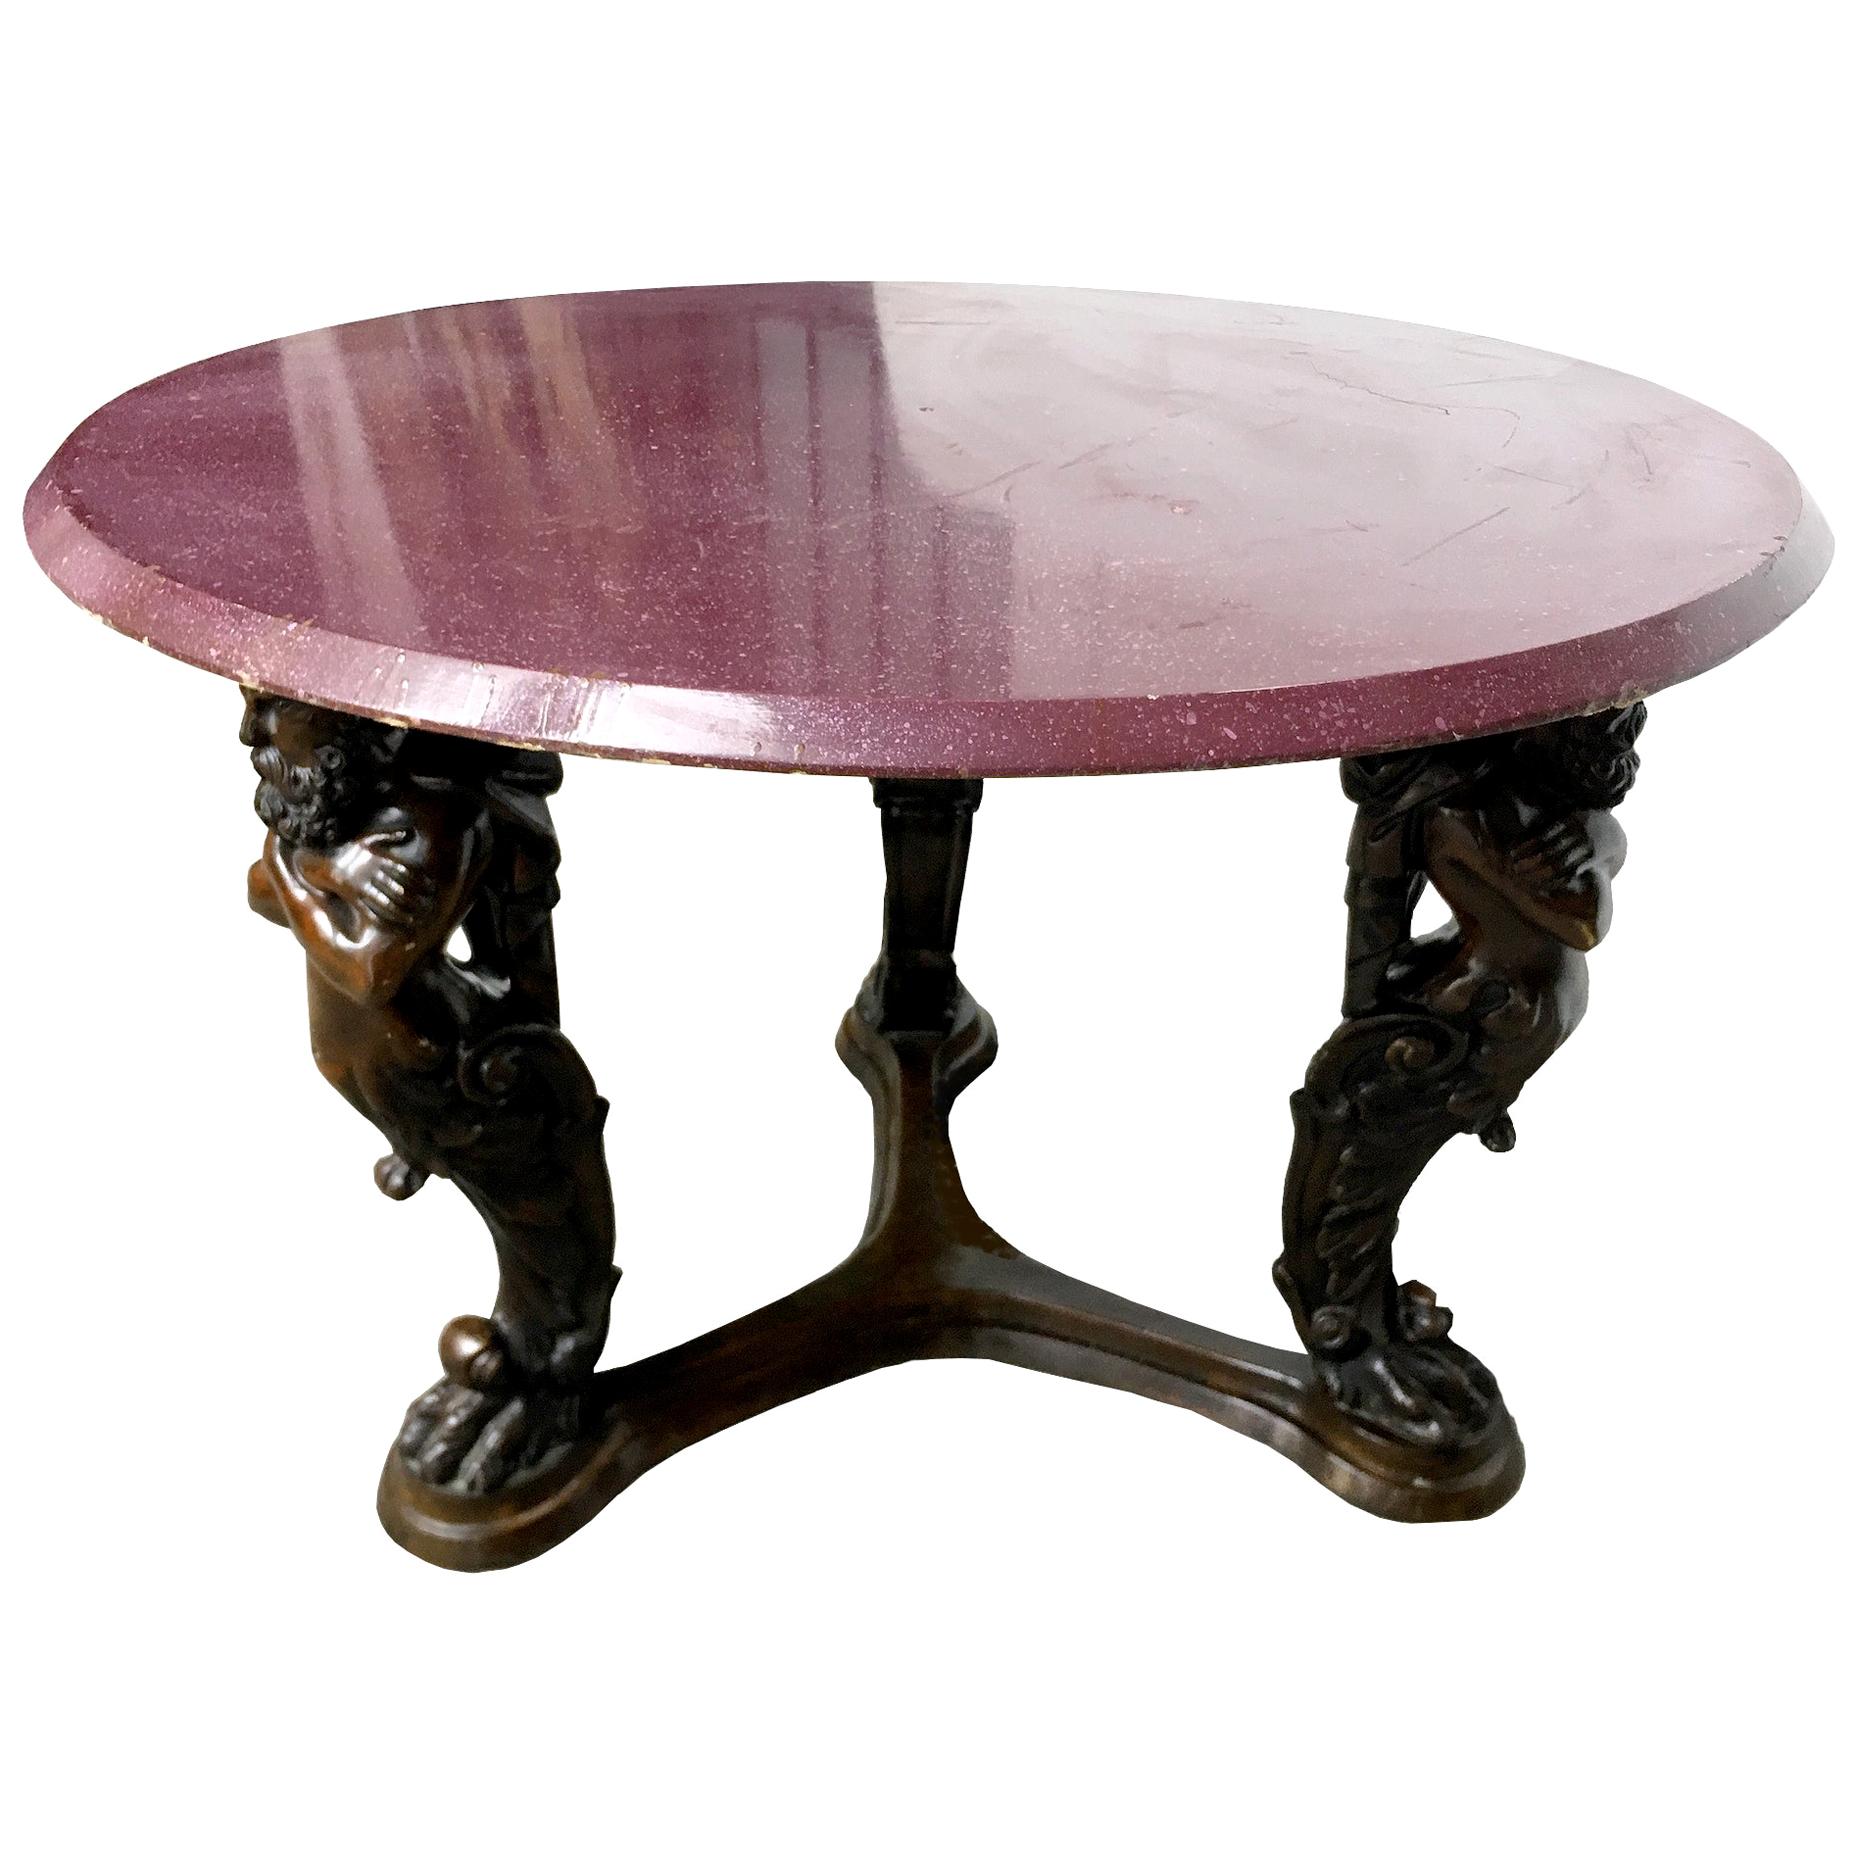 Large Italian Bronze Pedestal Table, Tray Painted in Imitation of Porphyry